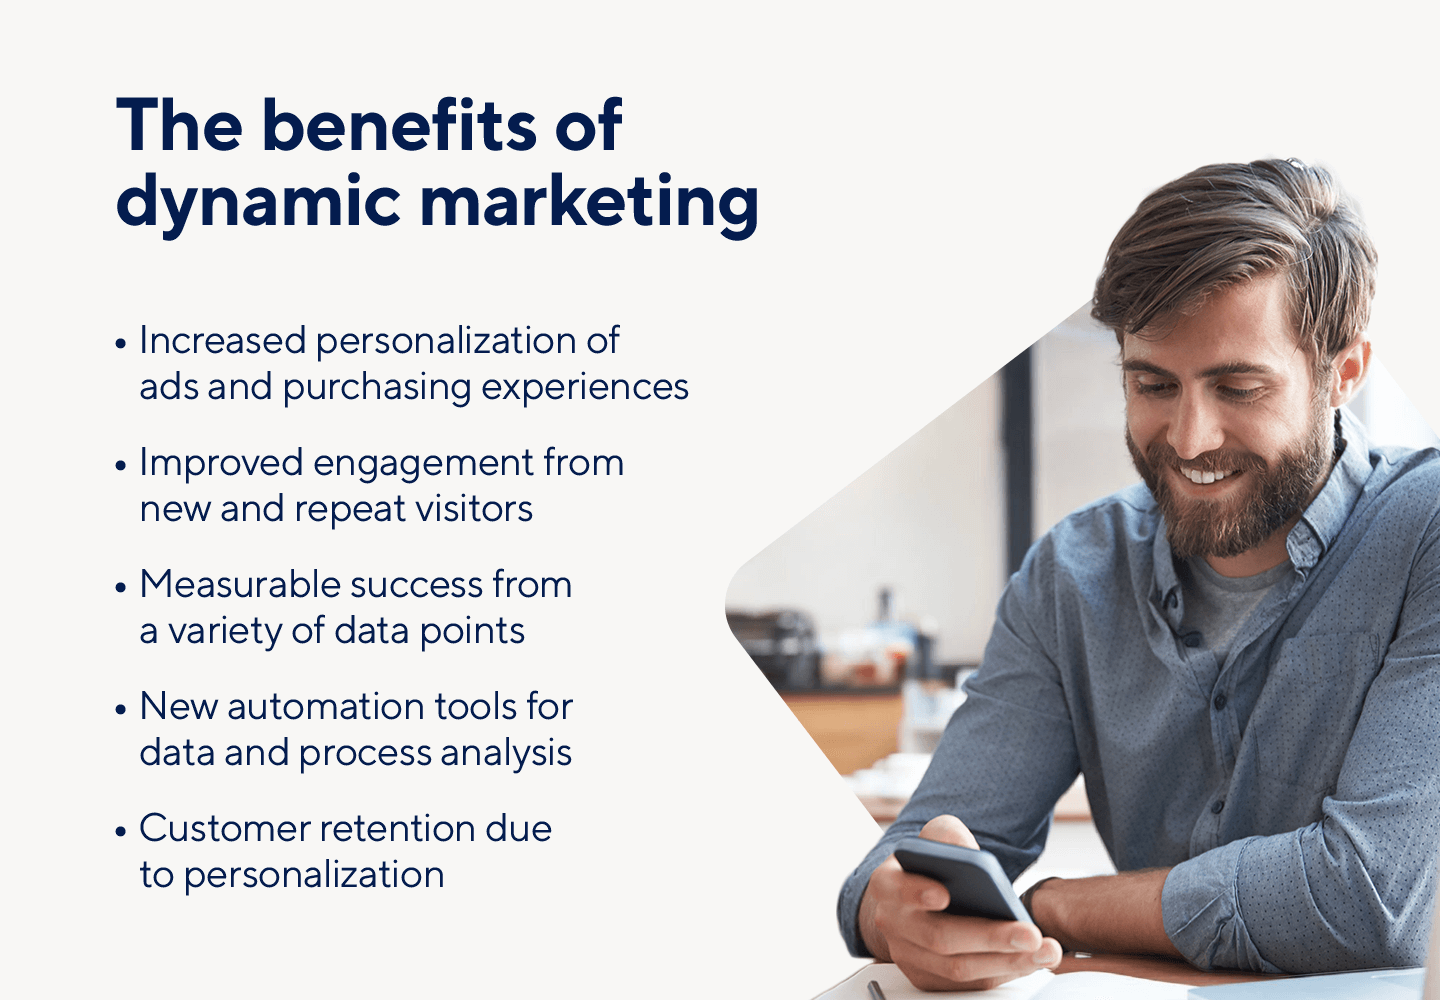 Personalization and customer retention are some of the benefits of dynamic marketing.